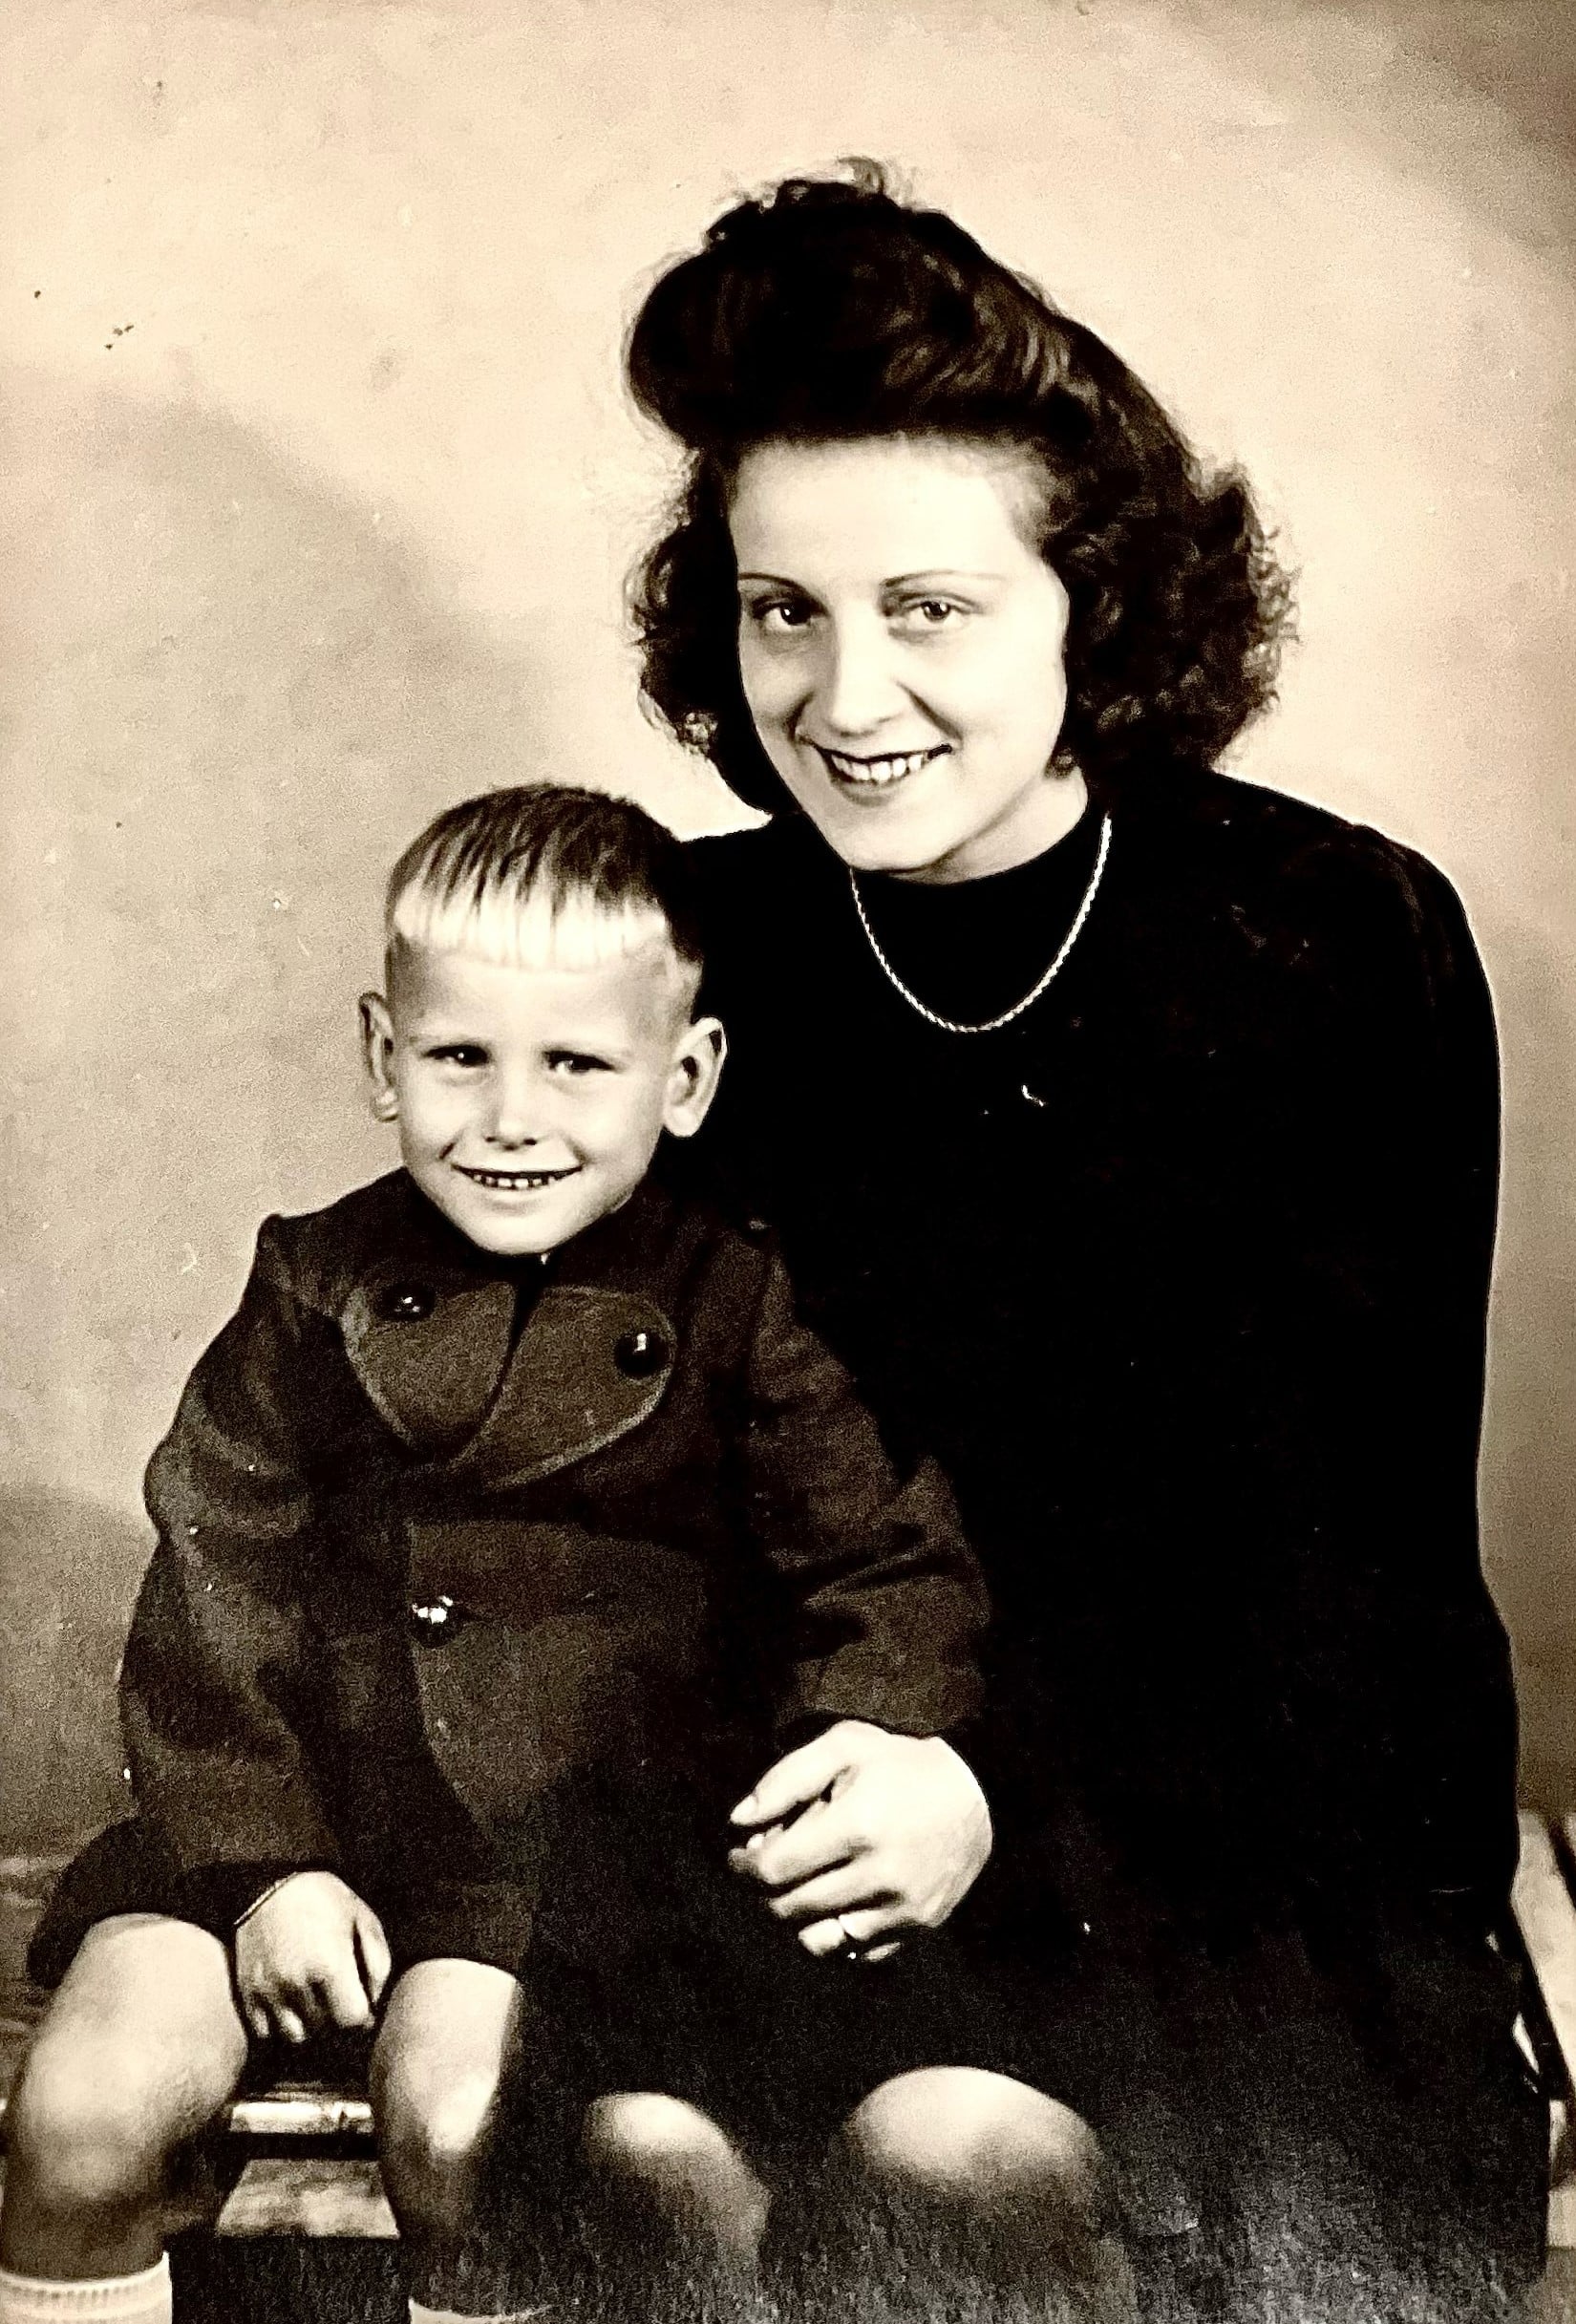 Fred and his mother during a visit to the orphanage